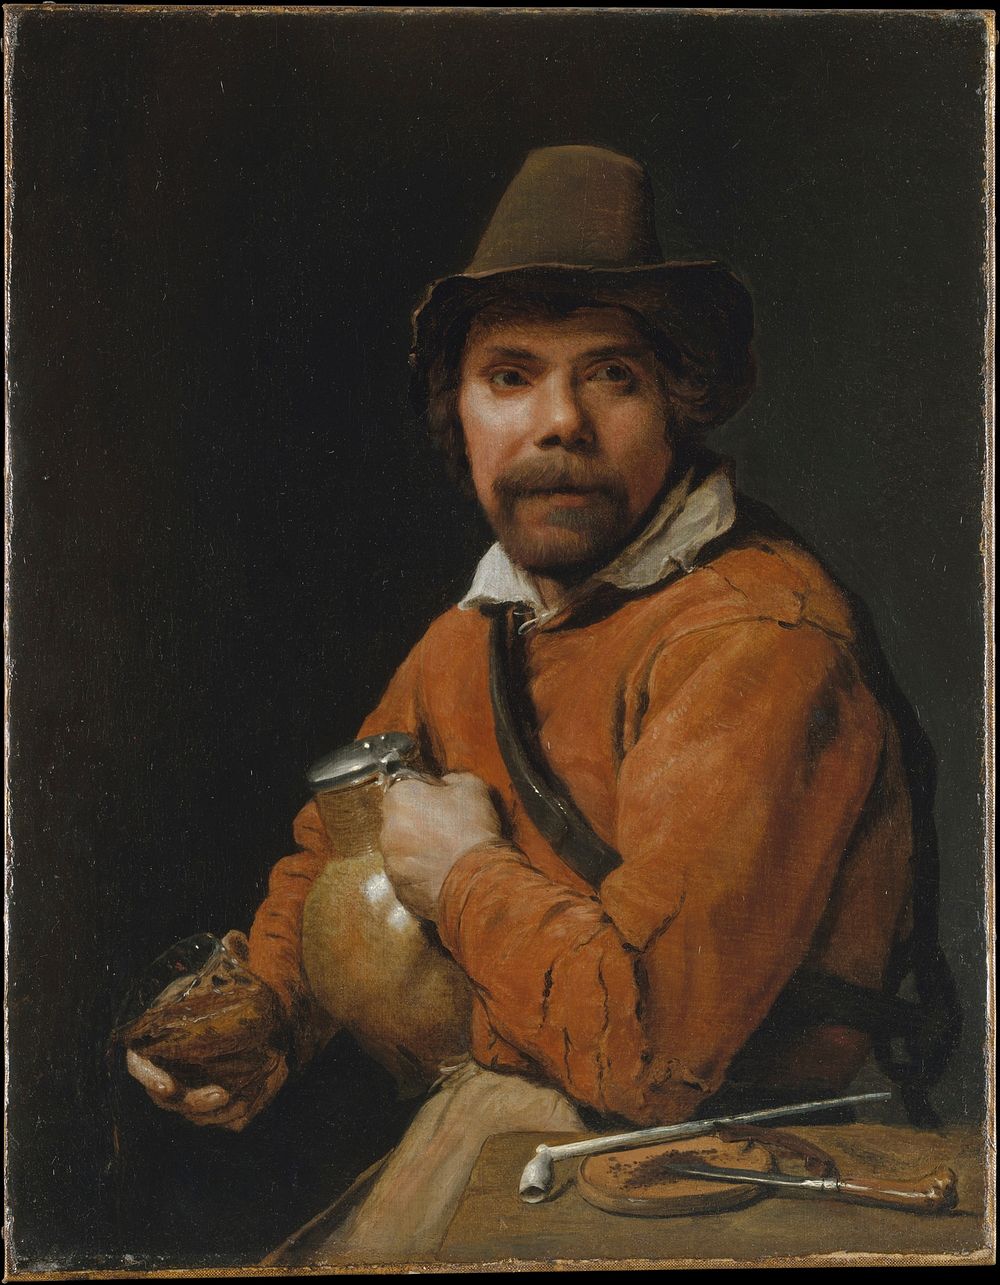 Man Holding a Jug by Michiel Sweerts